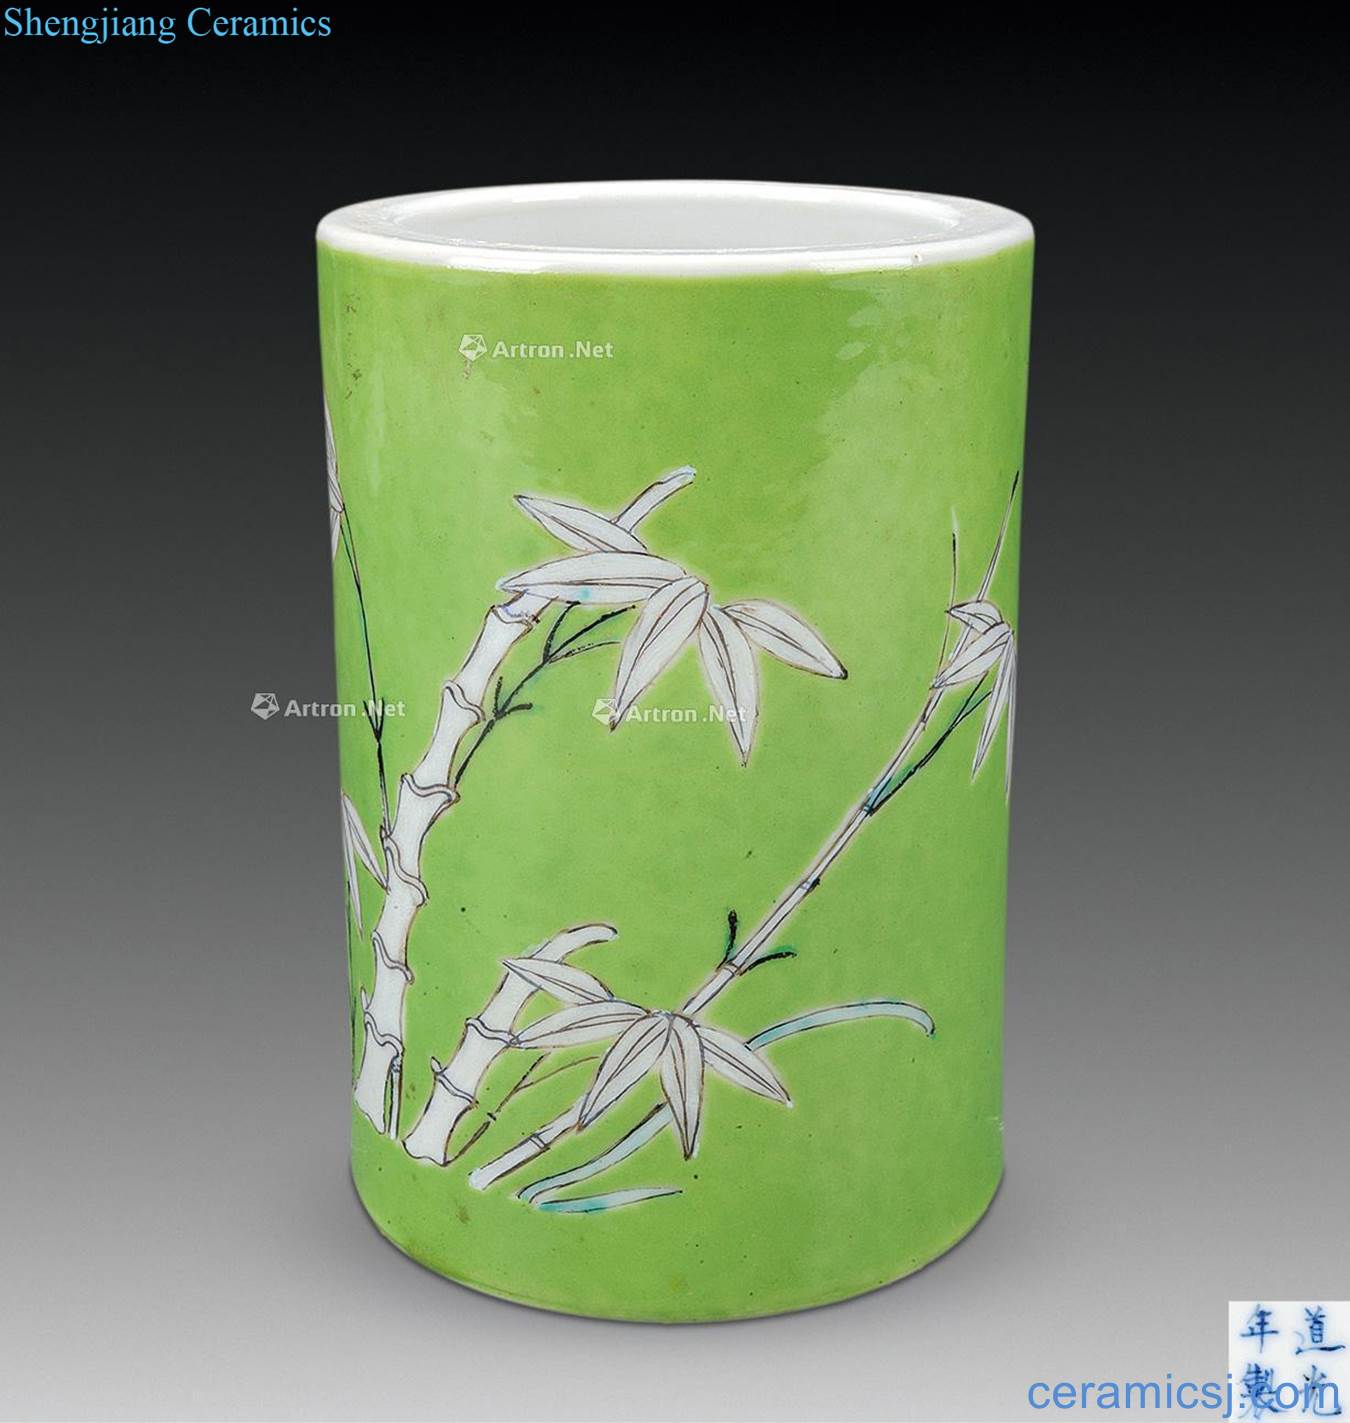 Qing daoguang The green color ink bamboo pen container